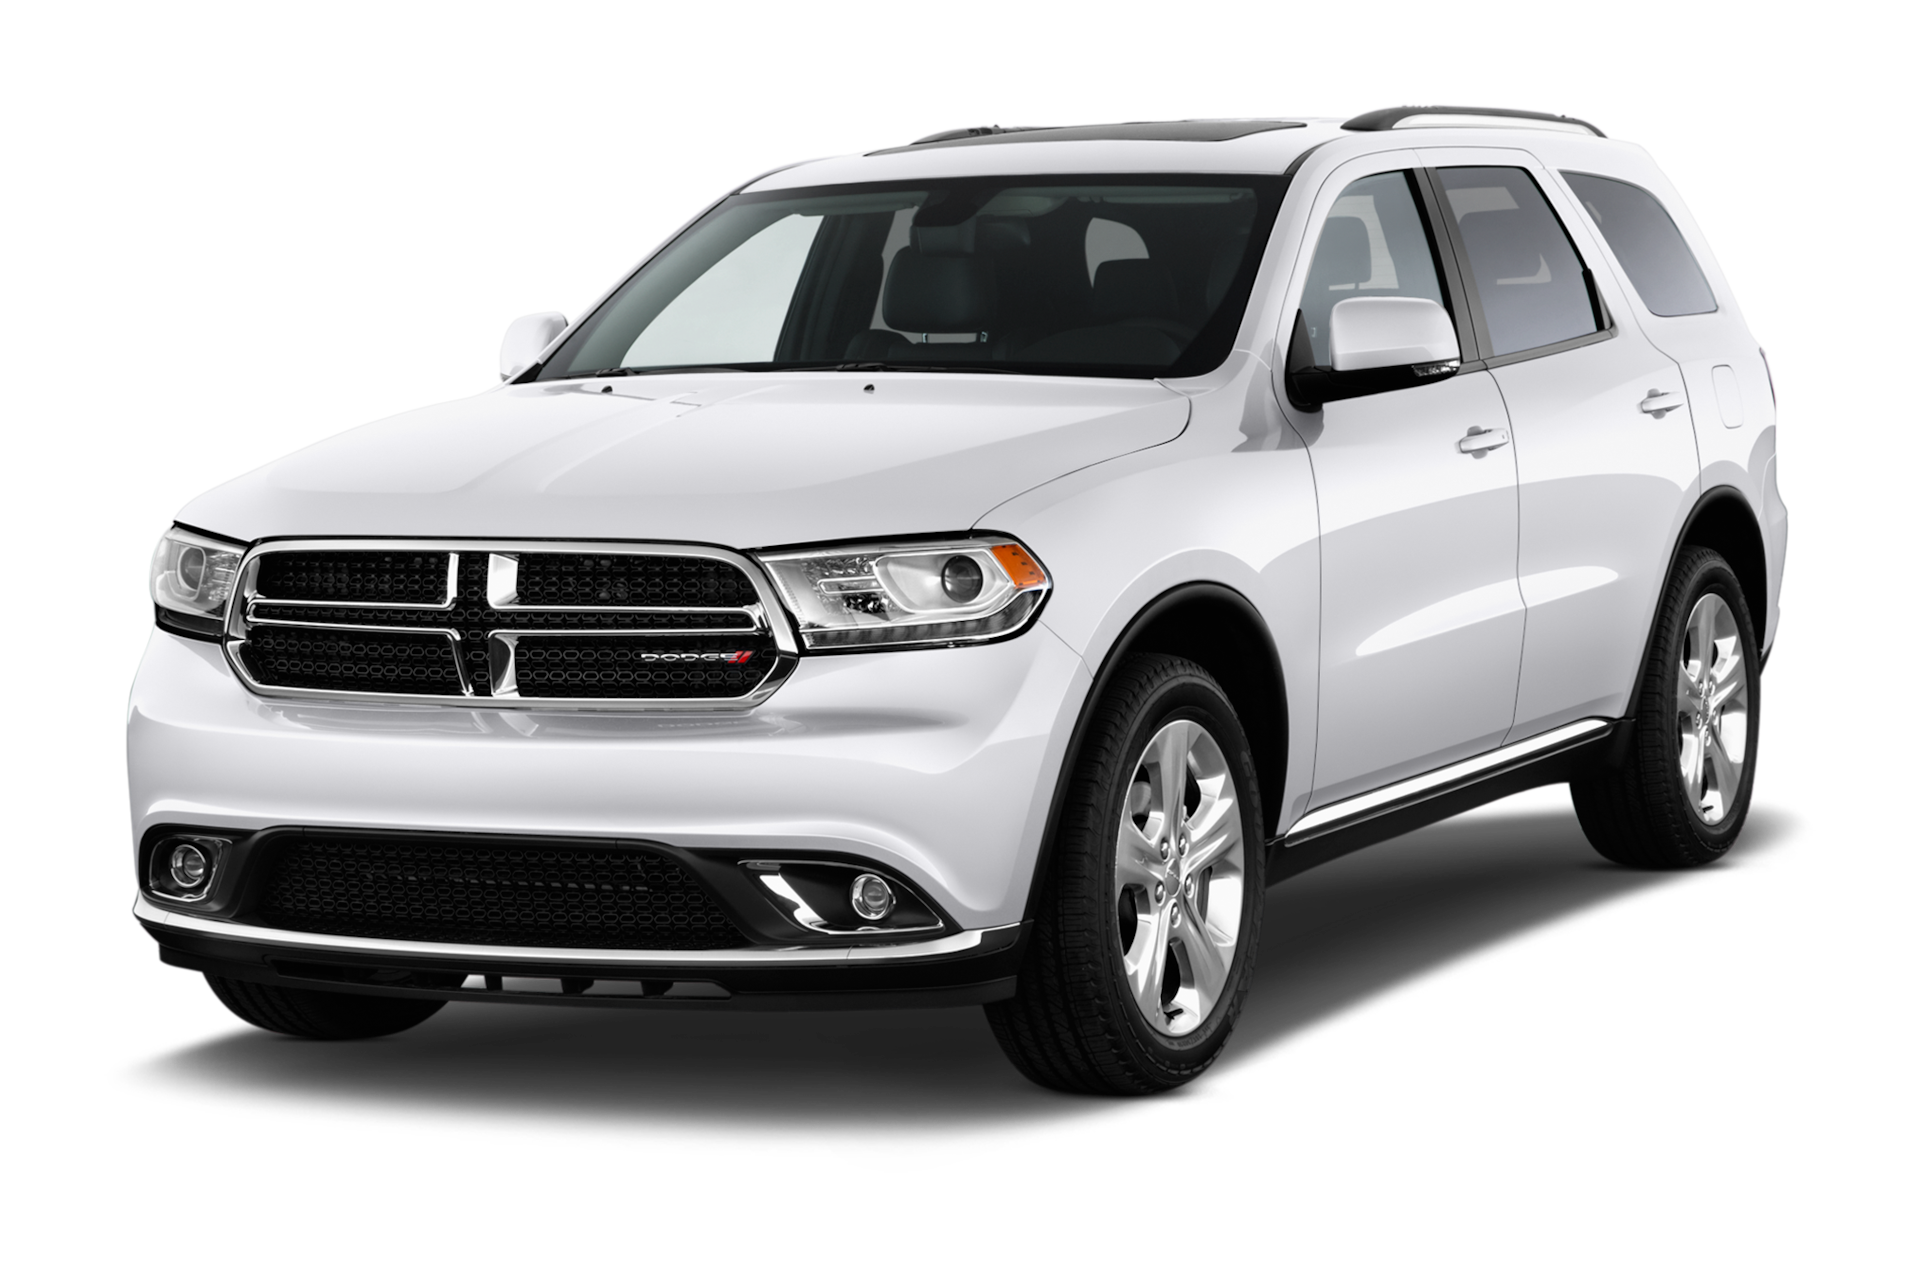 2014 Dodge Durango Prices, Reviews, and Photos - MotorTrend